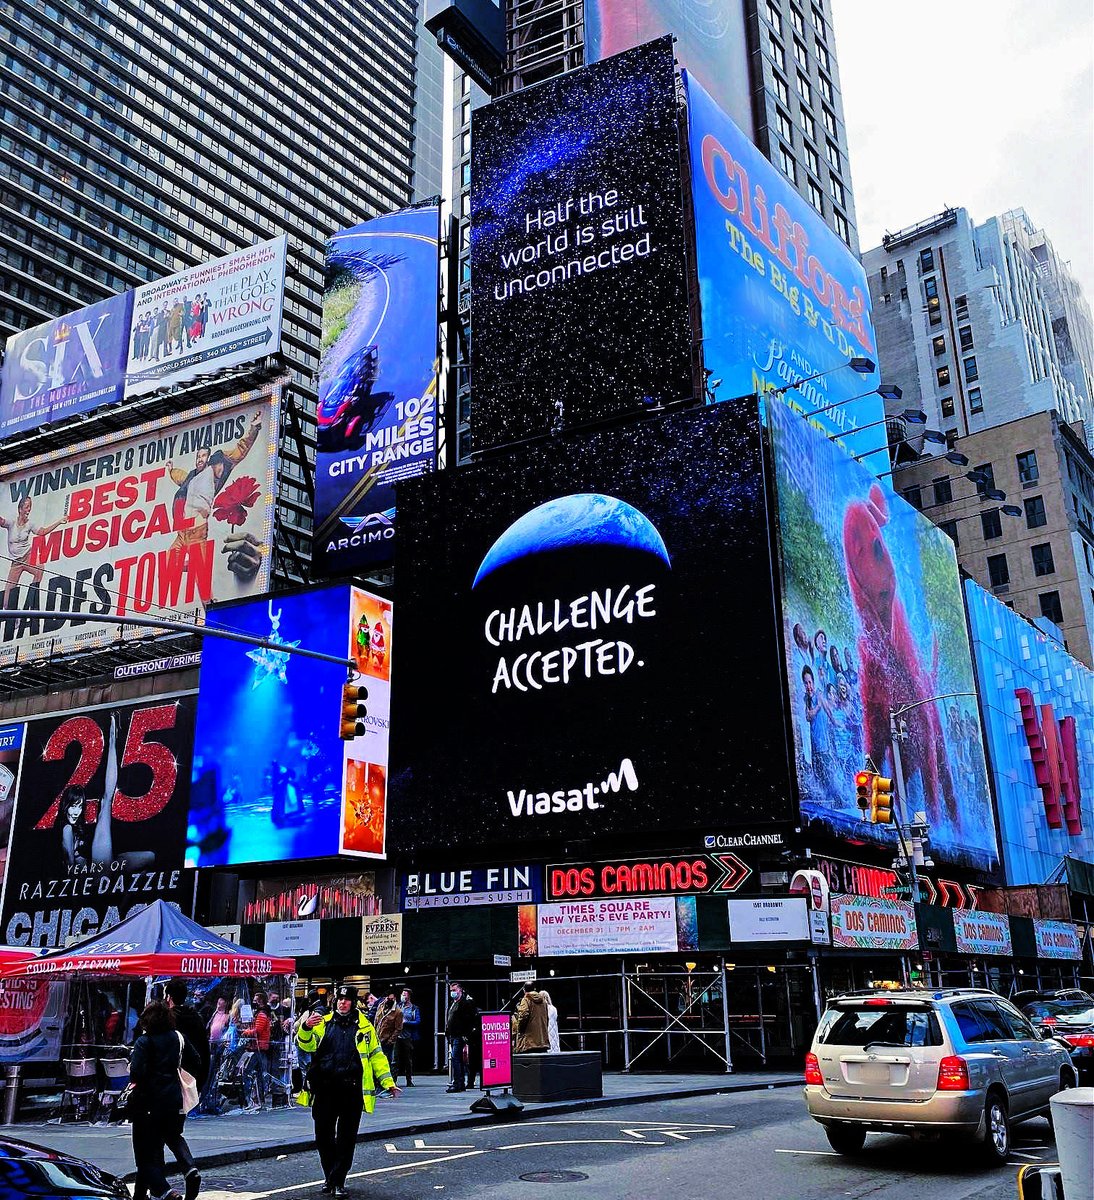 Look who was spotted in iconic Times Square this week! #UnlockingOpportunity